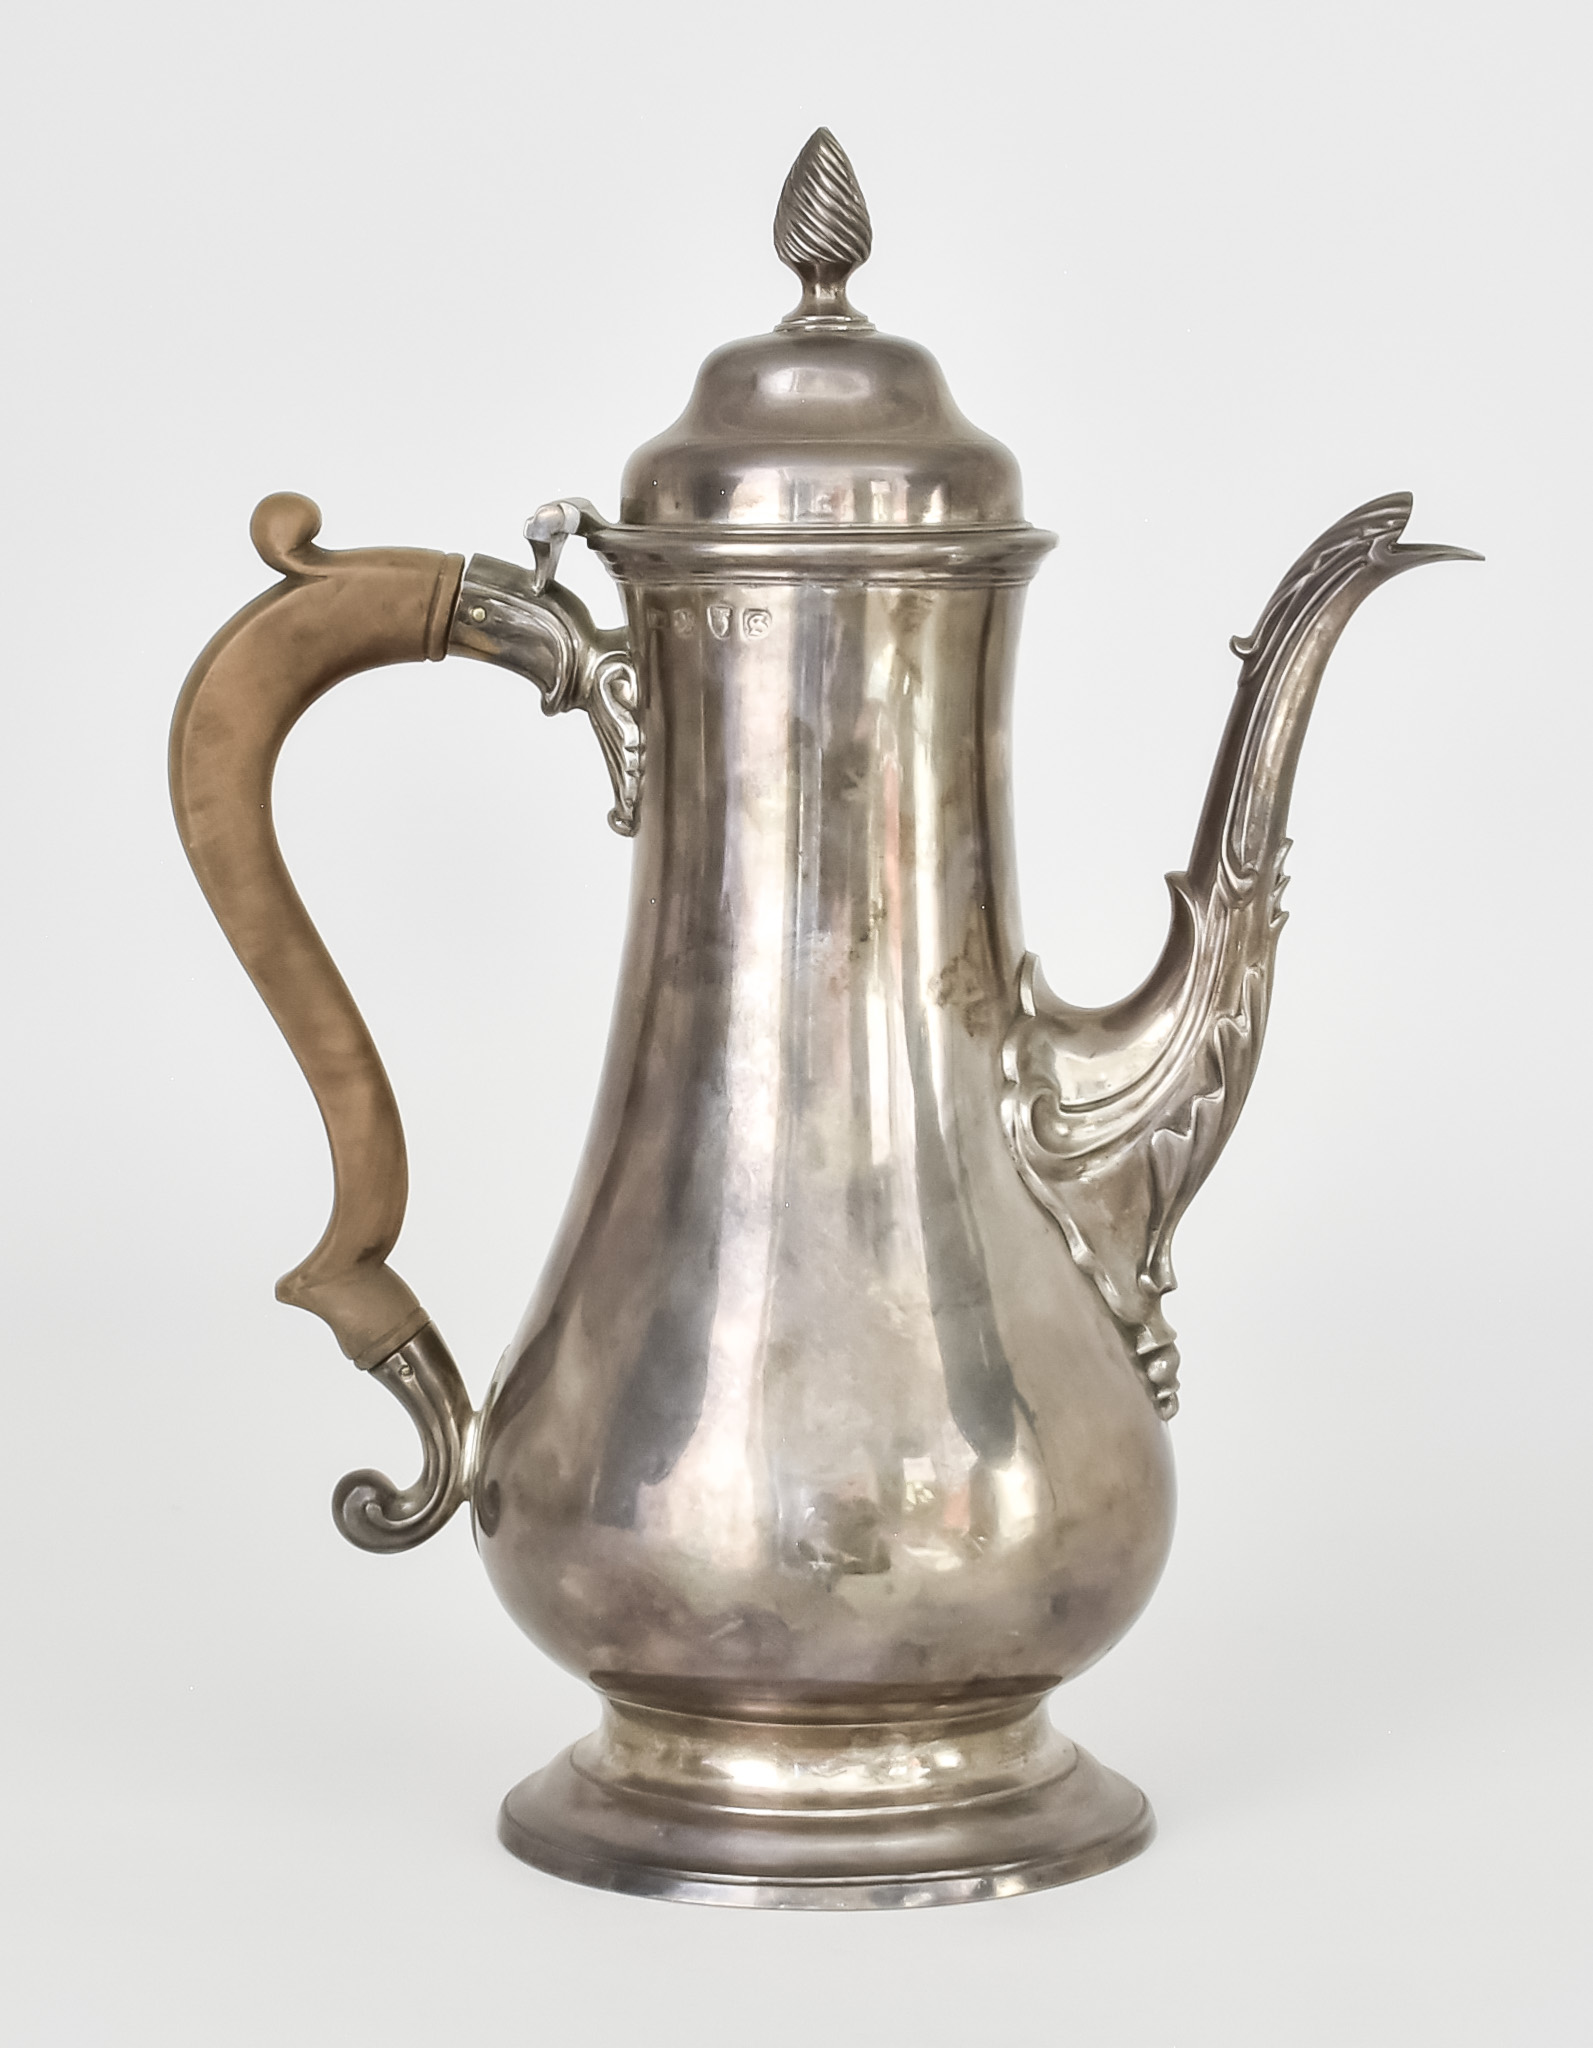 A George III Silver Coffee Pot by W T, London 1773, the shaped cover with reeded finial, plain